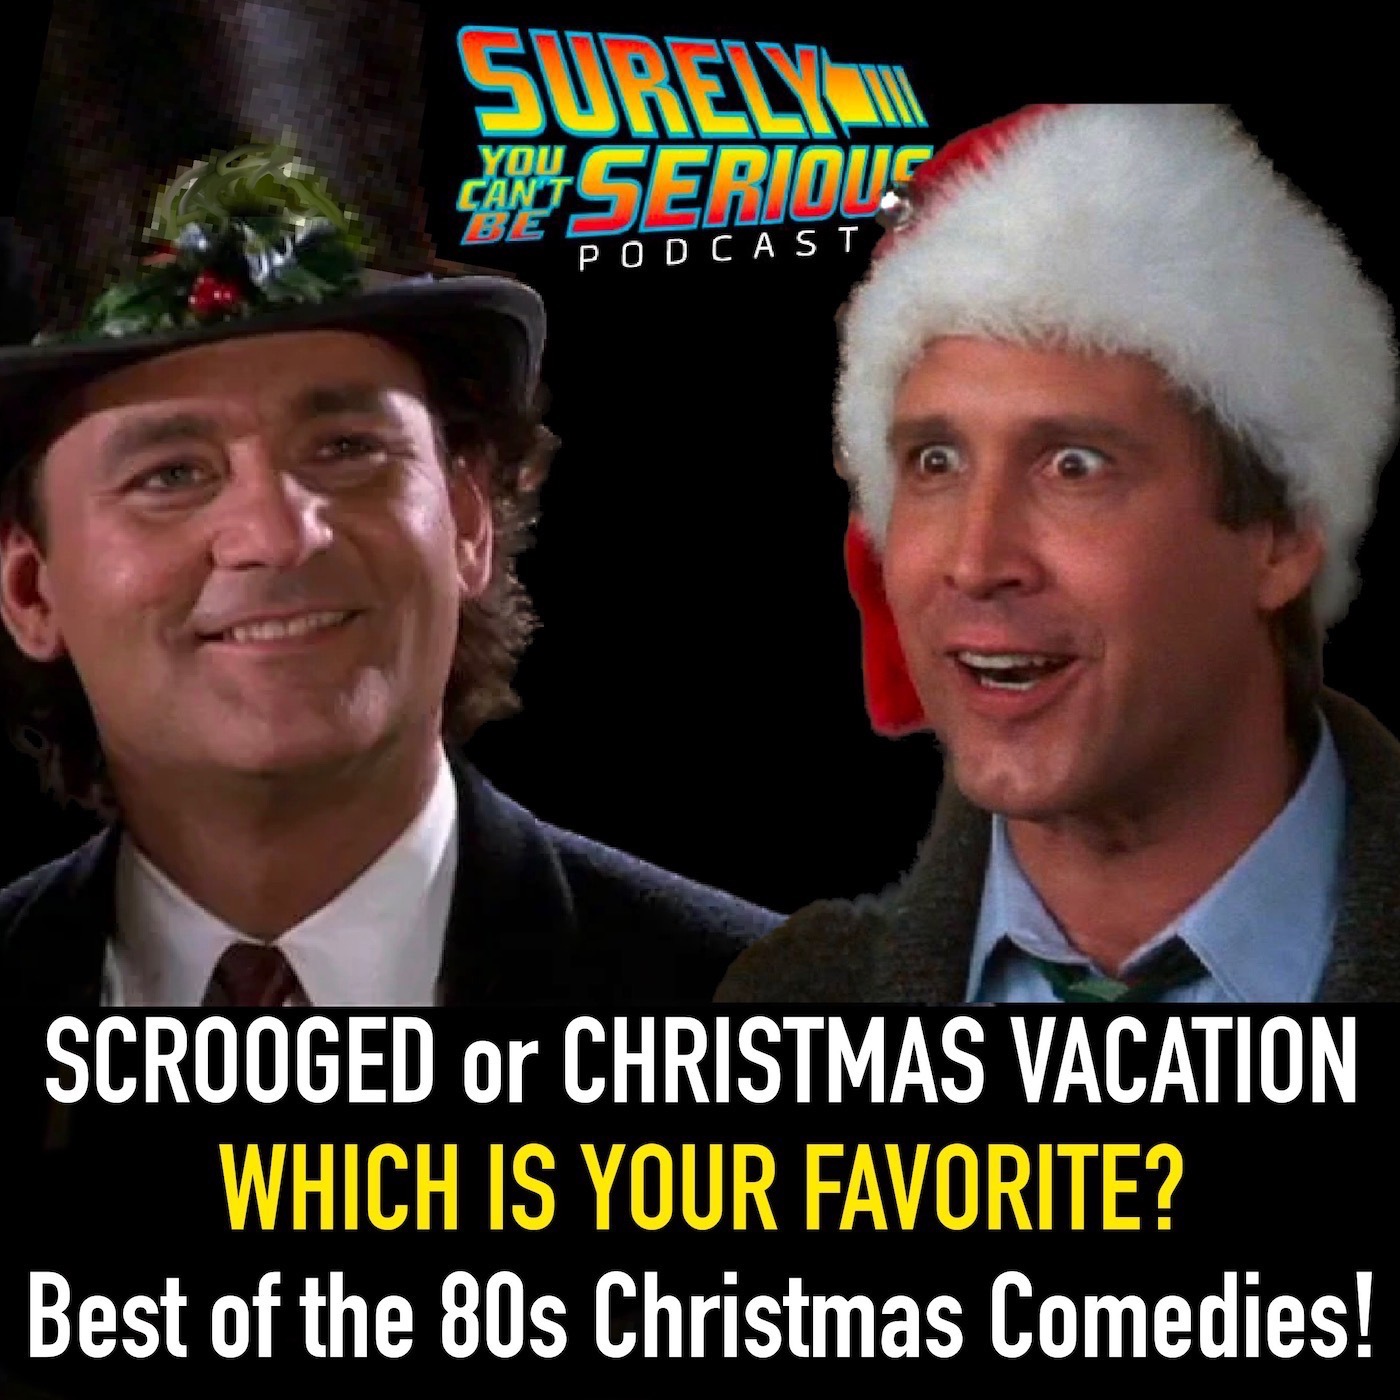 Scrooged (1988) vs. Christmas Vacation (1989): Part 2 Image